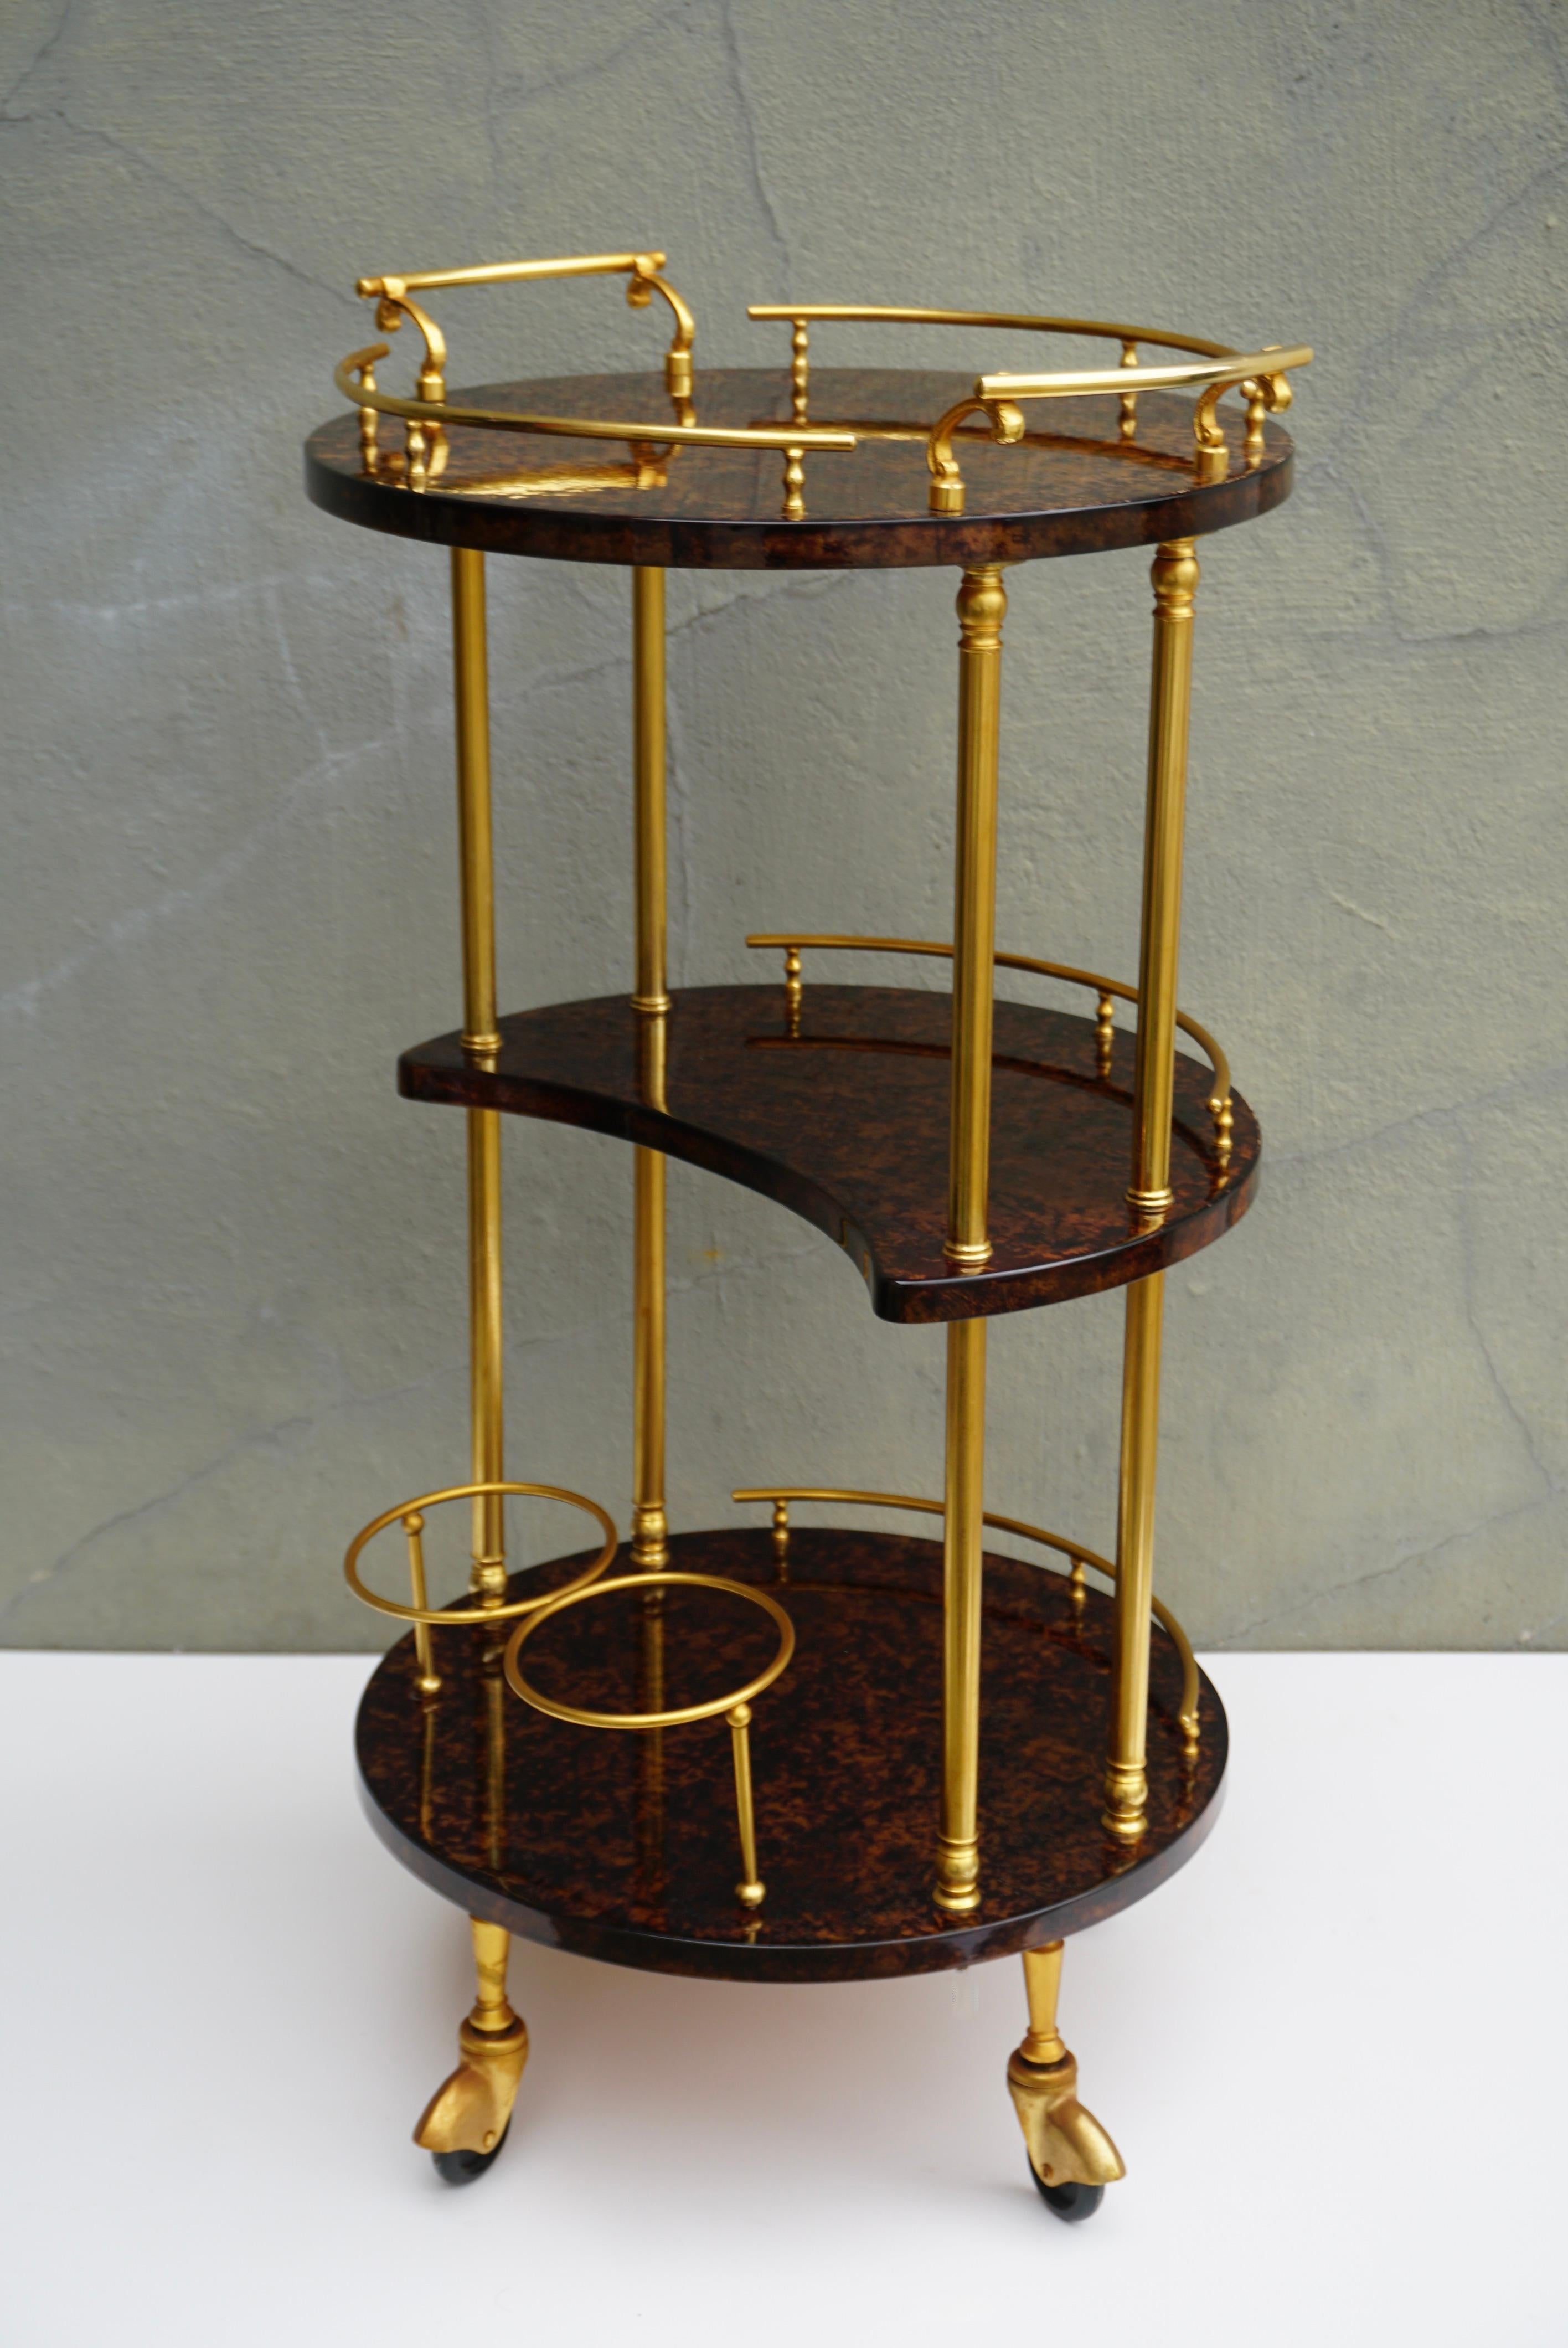 20th Century Serving Bar Cart Goatskin and Brass by Aldo Tura, Italy 1960s For Sale